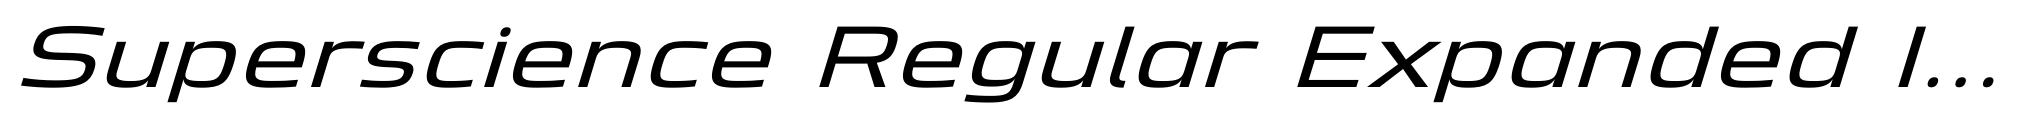 Superscience Regular Expanded Italic image